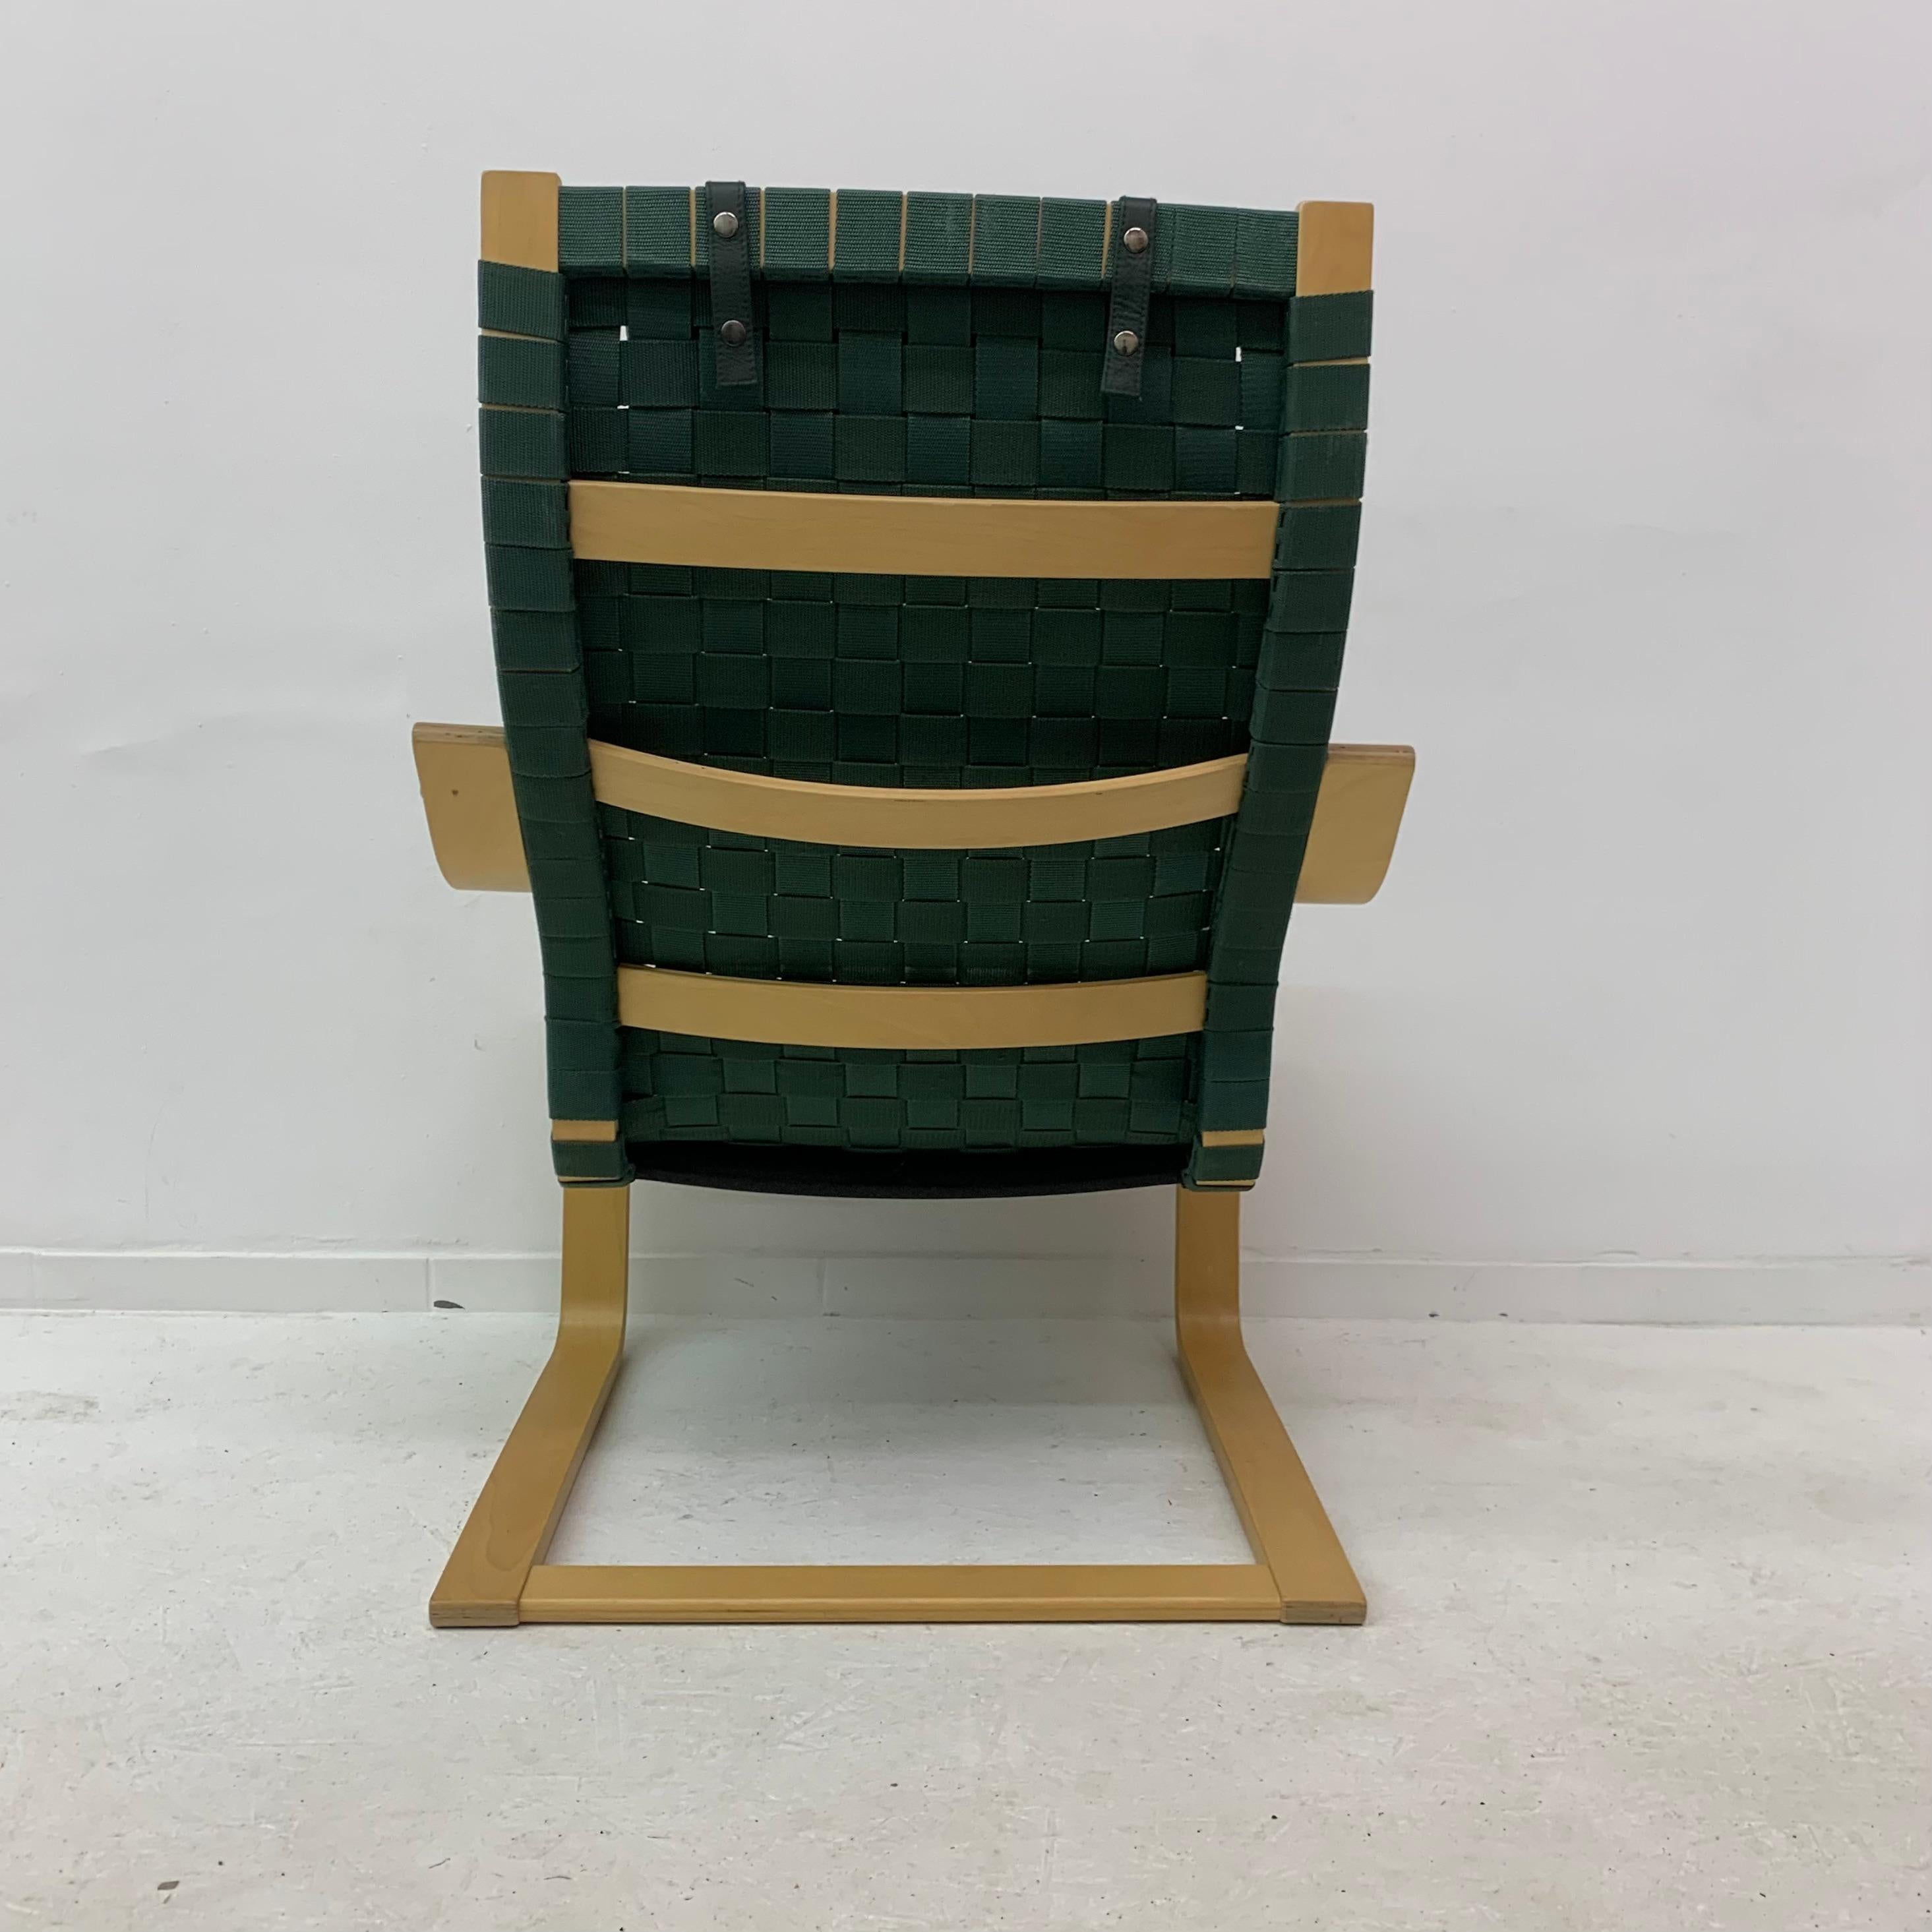 Limited Edition Aalto Tribute Points Chair by Noboru Nakamura for Ikea, 1999 For Sale 9